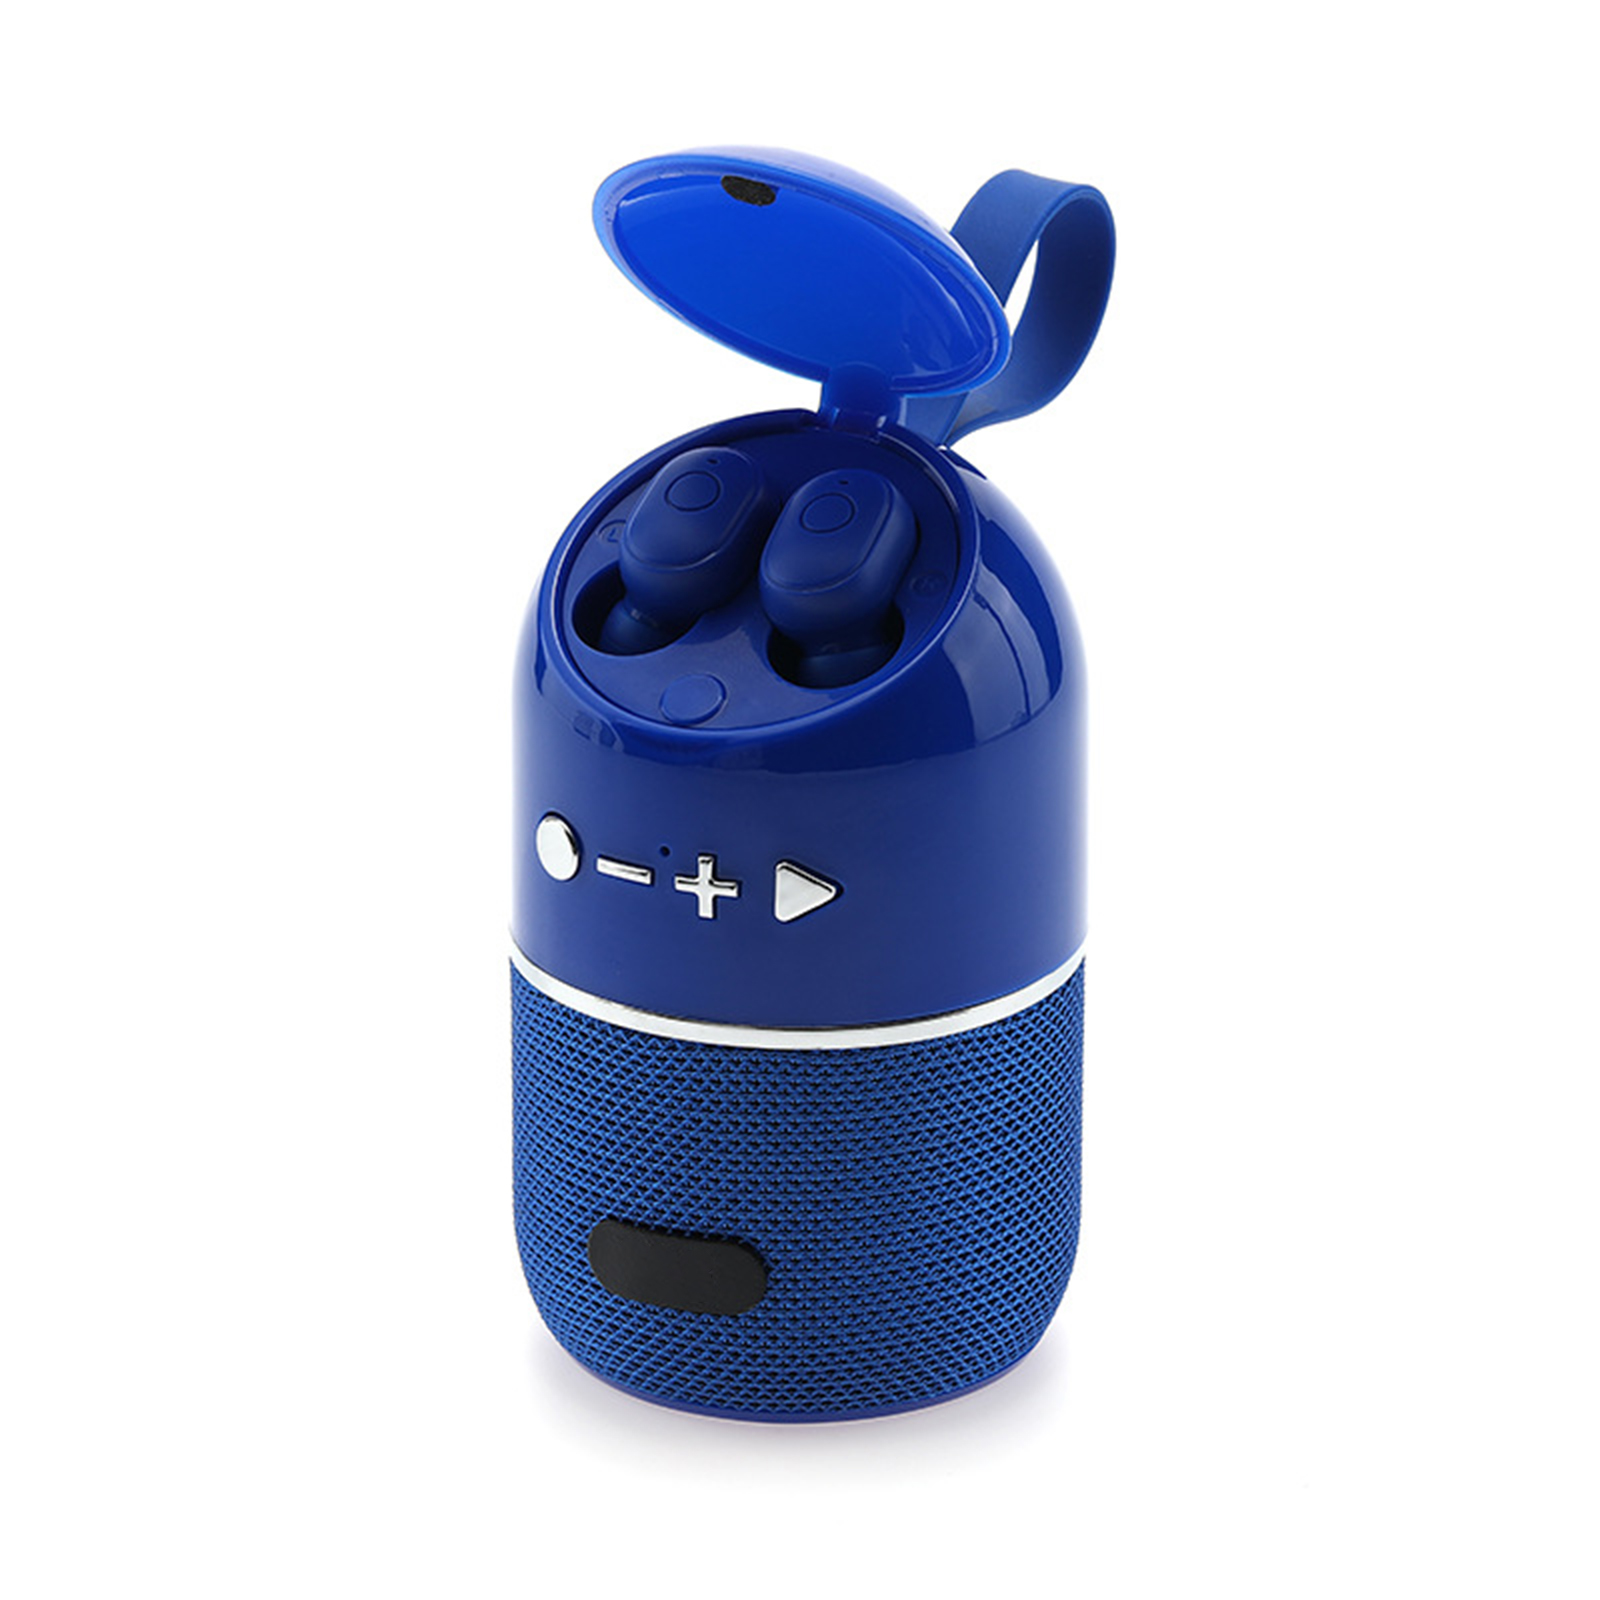 TG805 2 In 1 Portable Wireless Speaker Earbuds Portable Mini Wireless Speakers Headphones Combo For Home Party Outdoor Travel blue